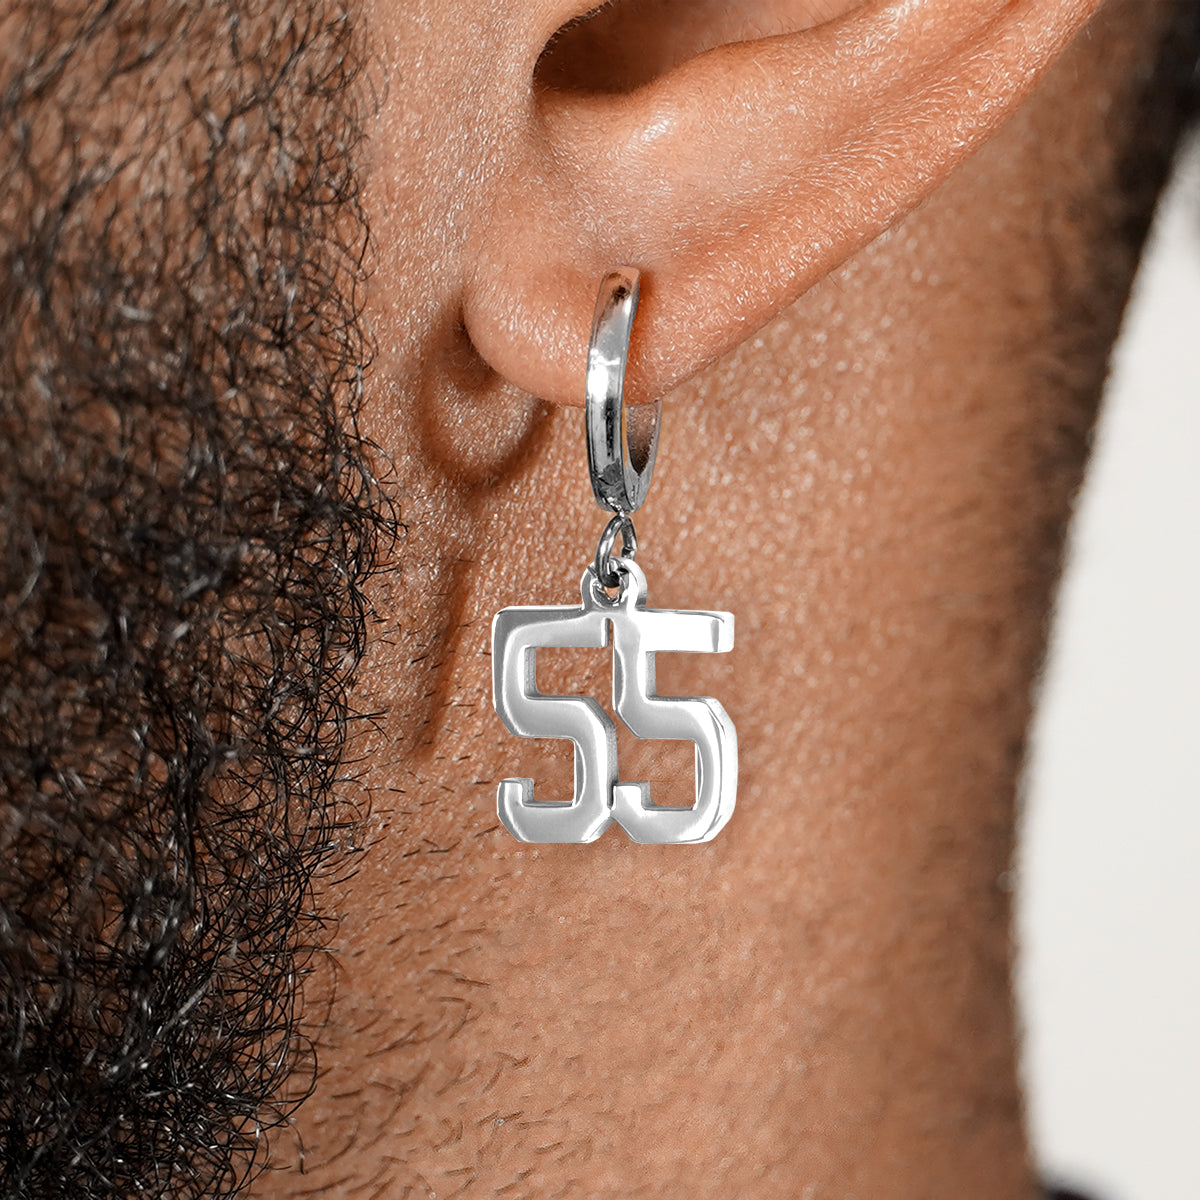 55 Number Earring - Stainless Steel